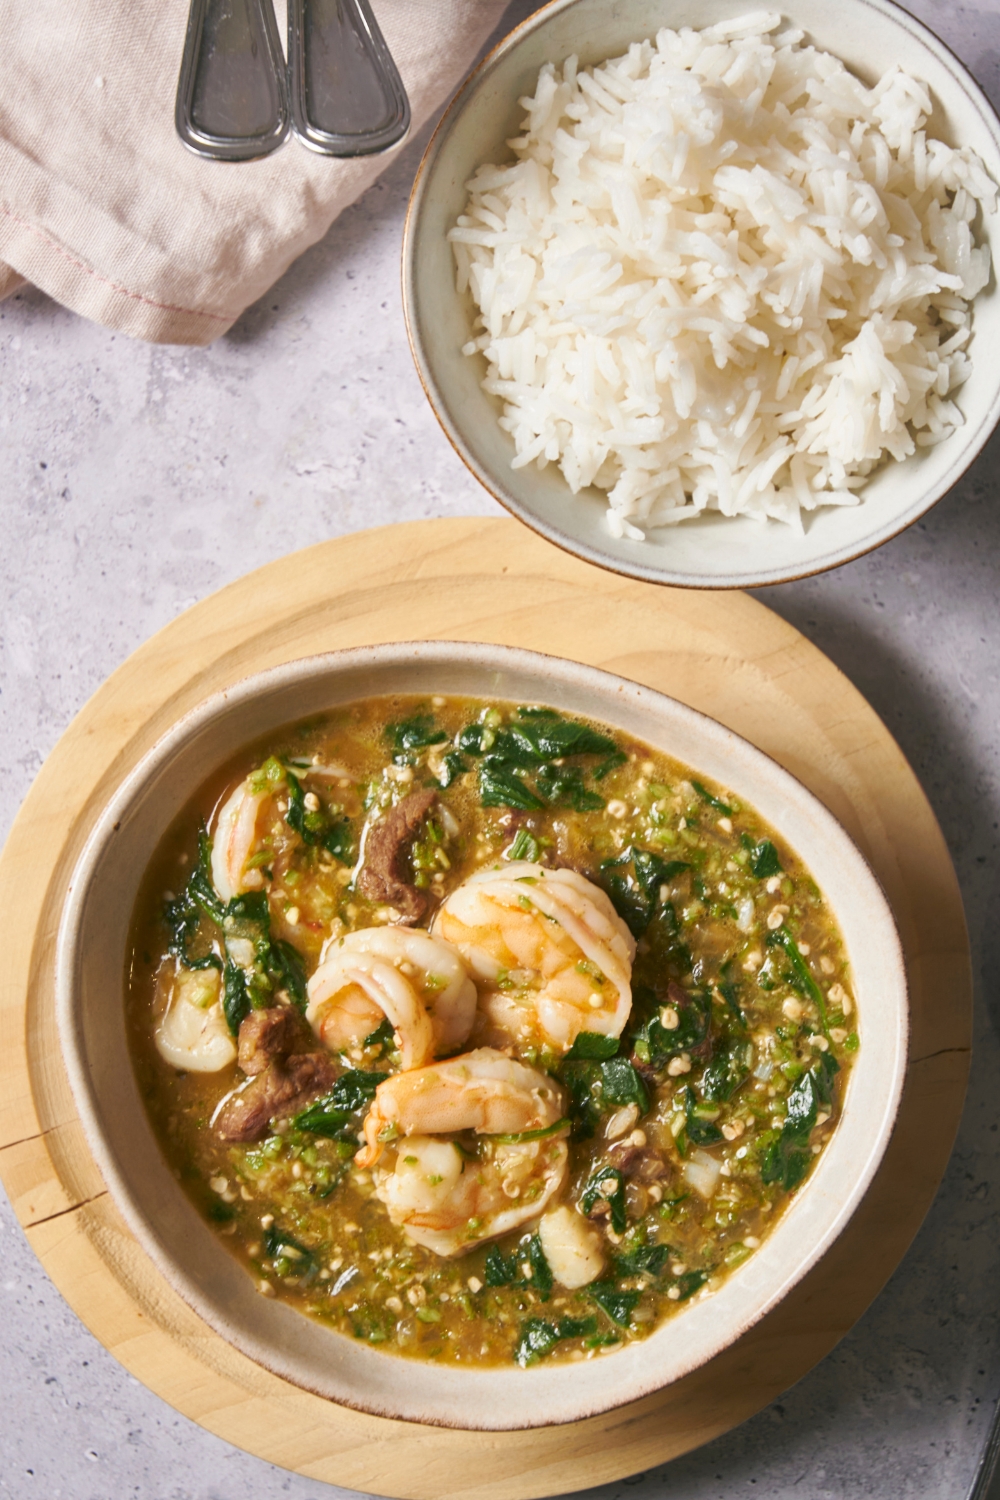 Shrimp on top of spinach and ground okra in a bowl filled with broth. Behind it is a bowl of white rice.